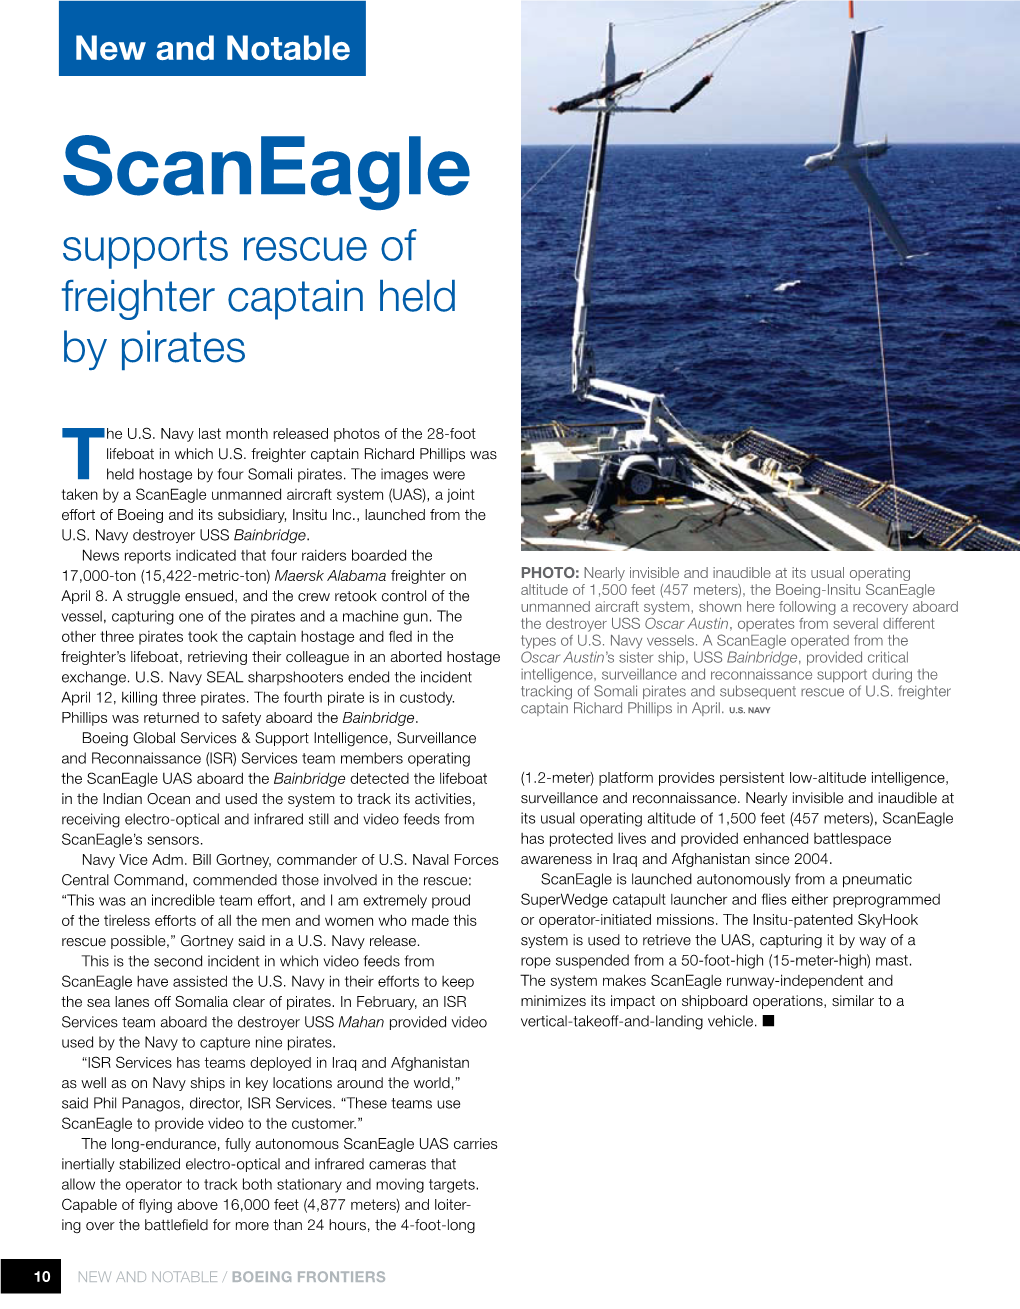 Scaneagle Supports Rescue of Freighter Captain Held by Pirates